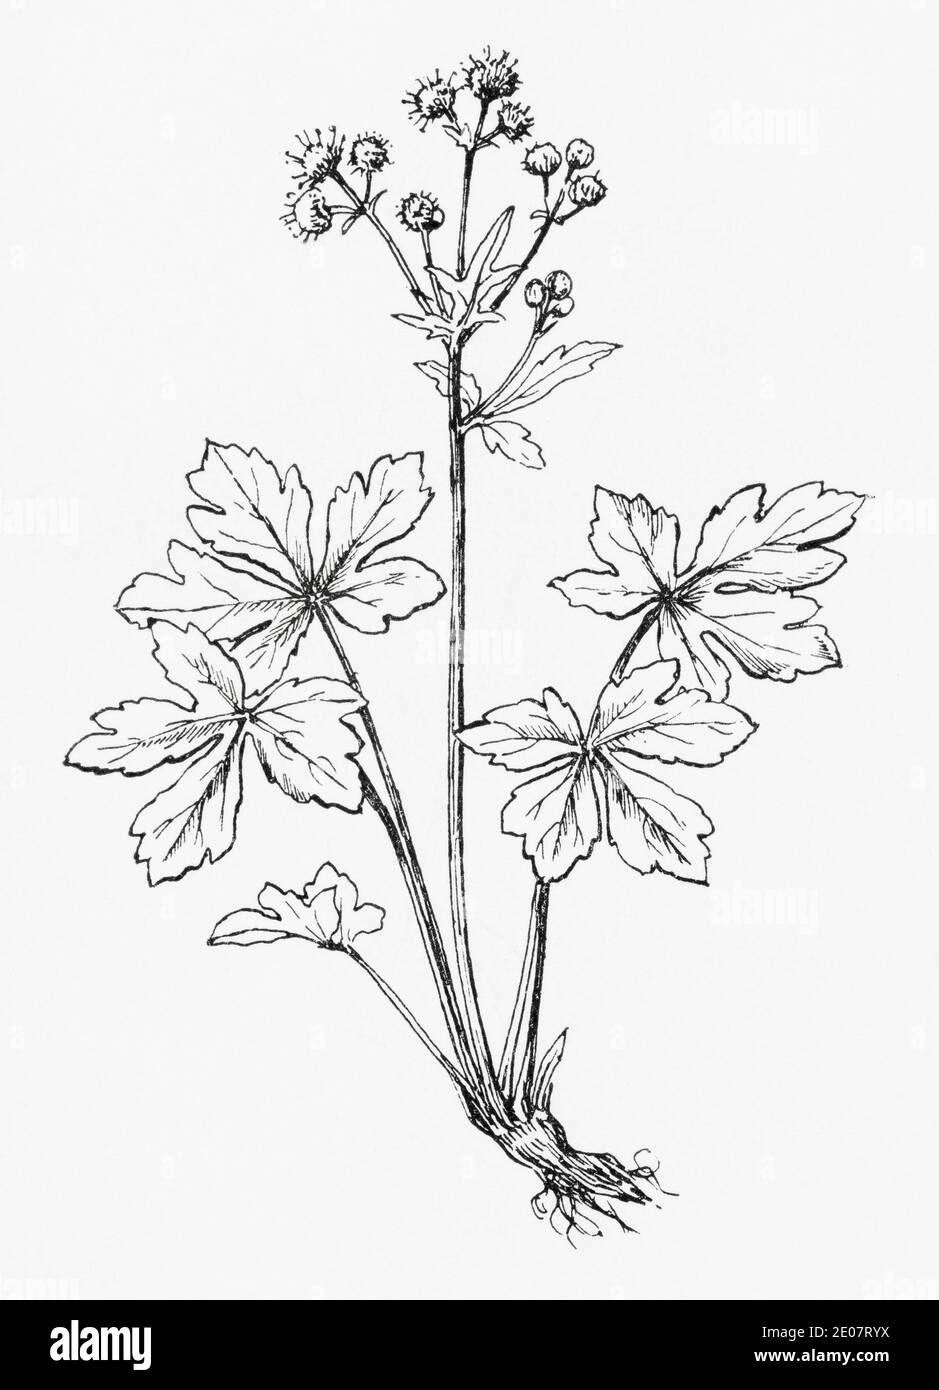 Old botanical illustration engraving of Wood Sanicle, Sanicle / Sanicula europaea. Traditional medicinal herbal plant. See Notes Stock Photo